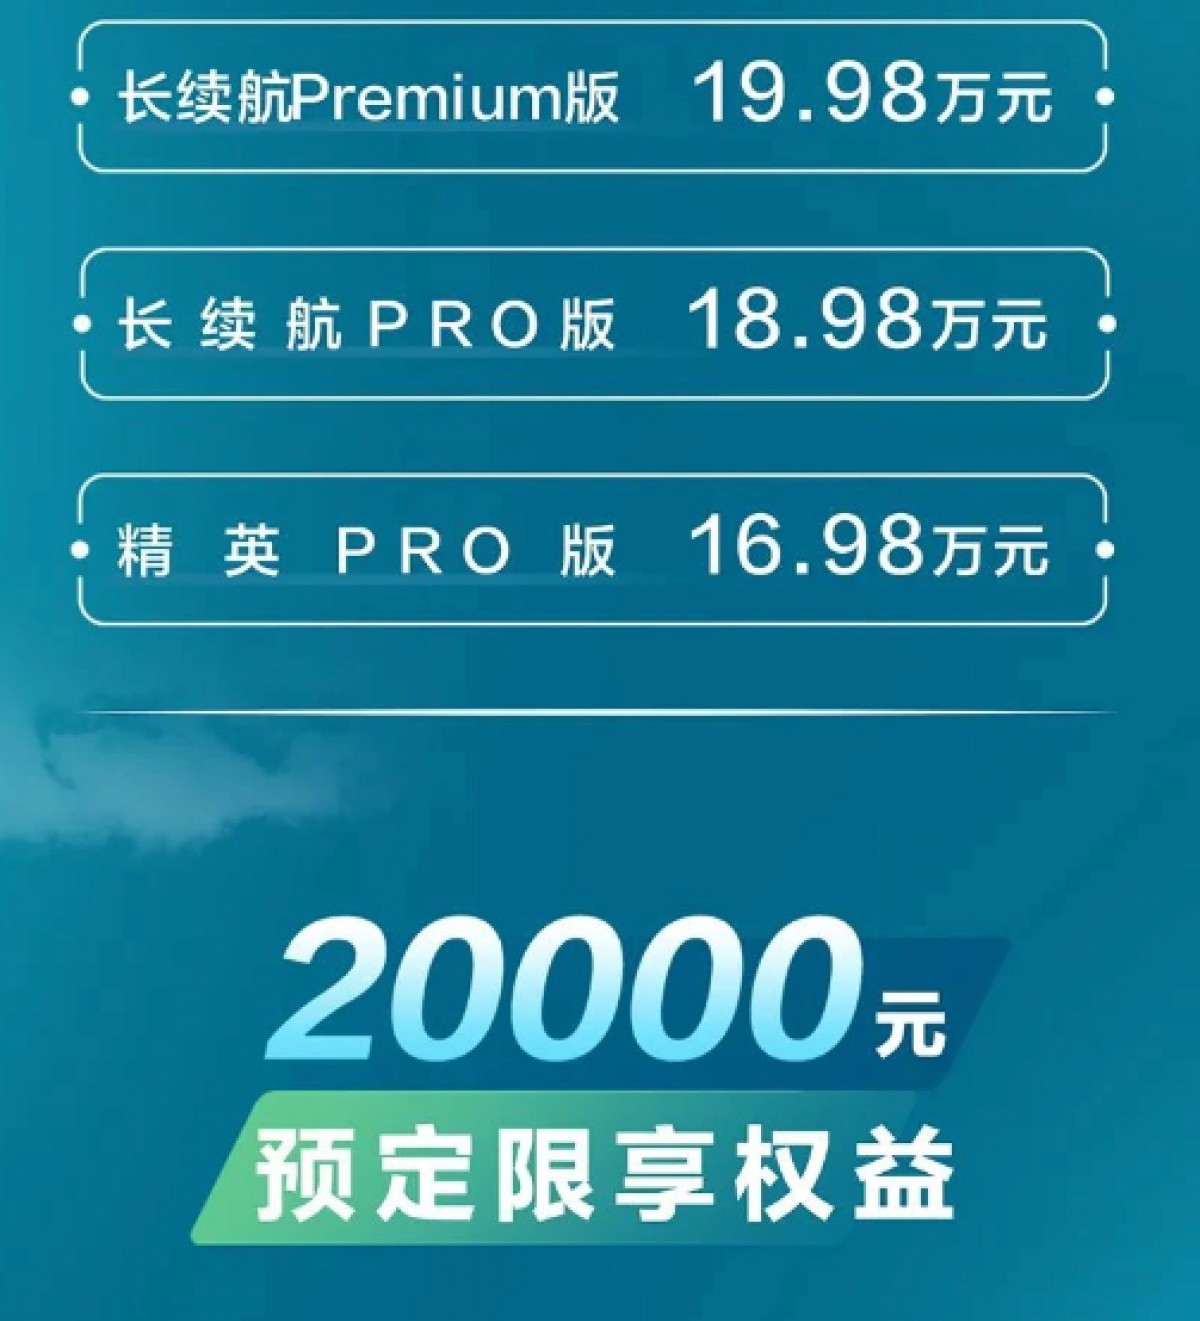 Poster advertising the RMB 20,000 discount